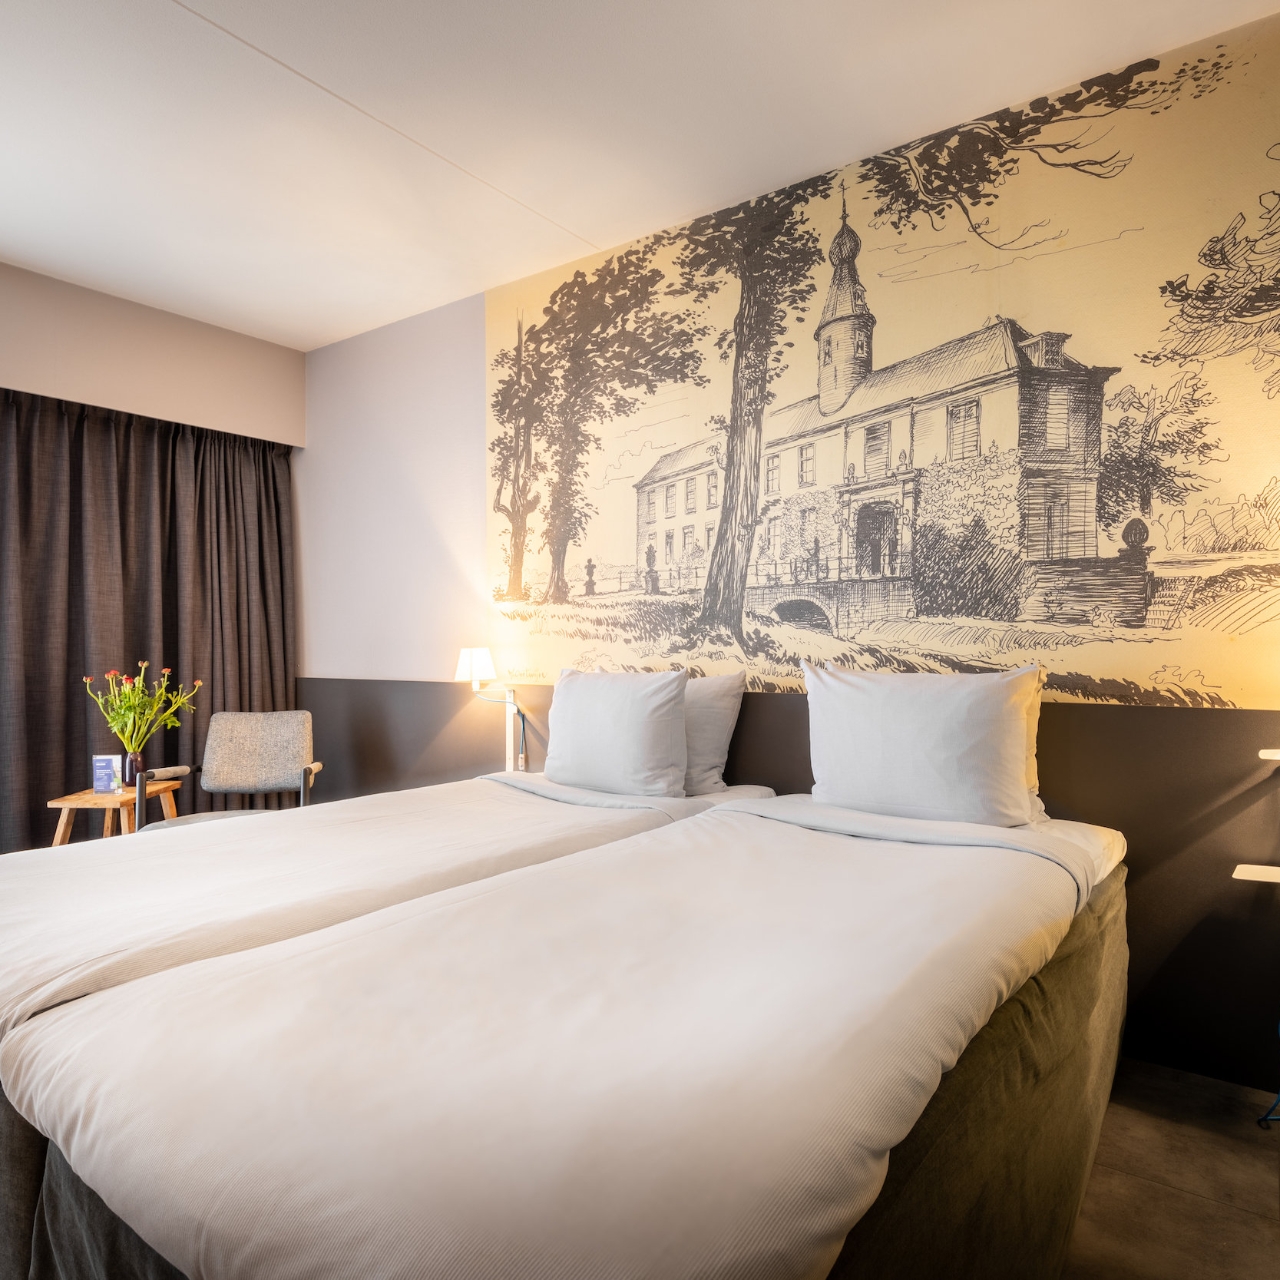 Hotel & Chateau Marquette - 4 HRS star hotel in Heemskerk (North Holland)